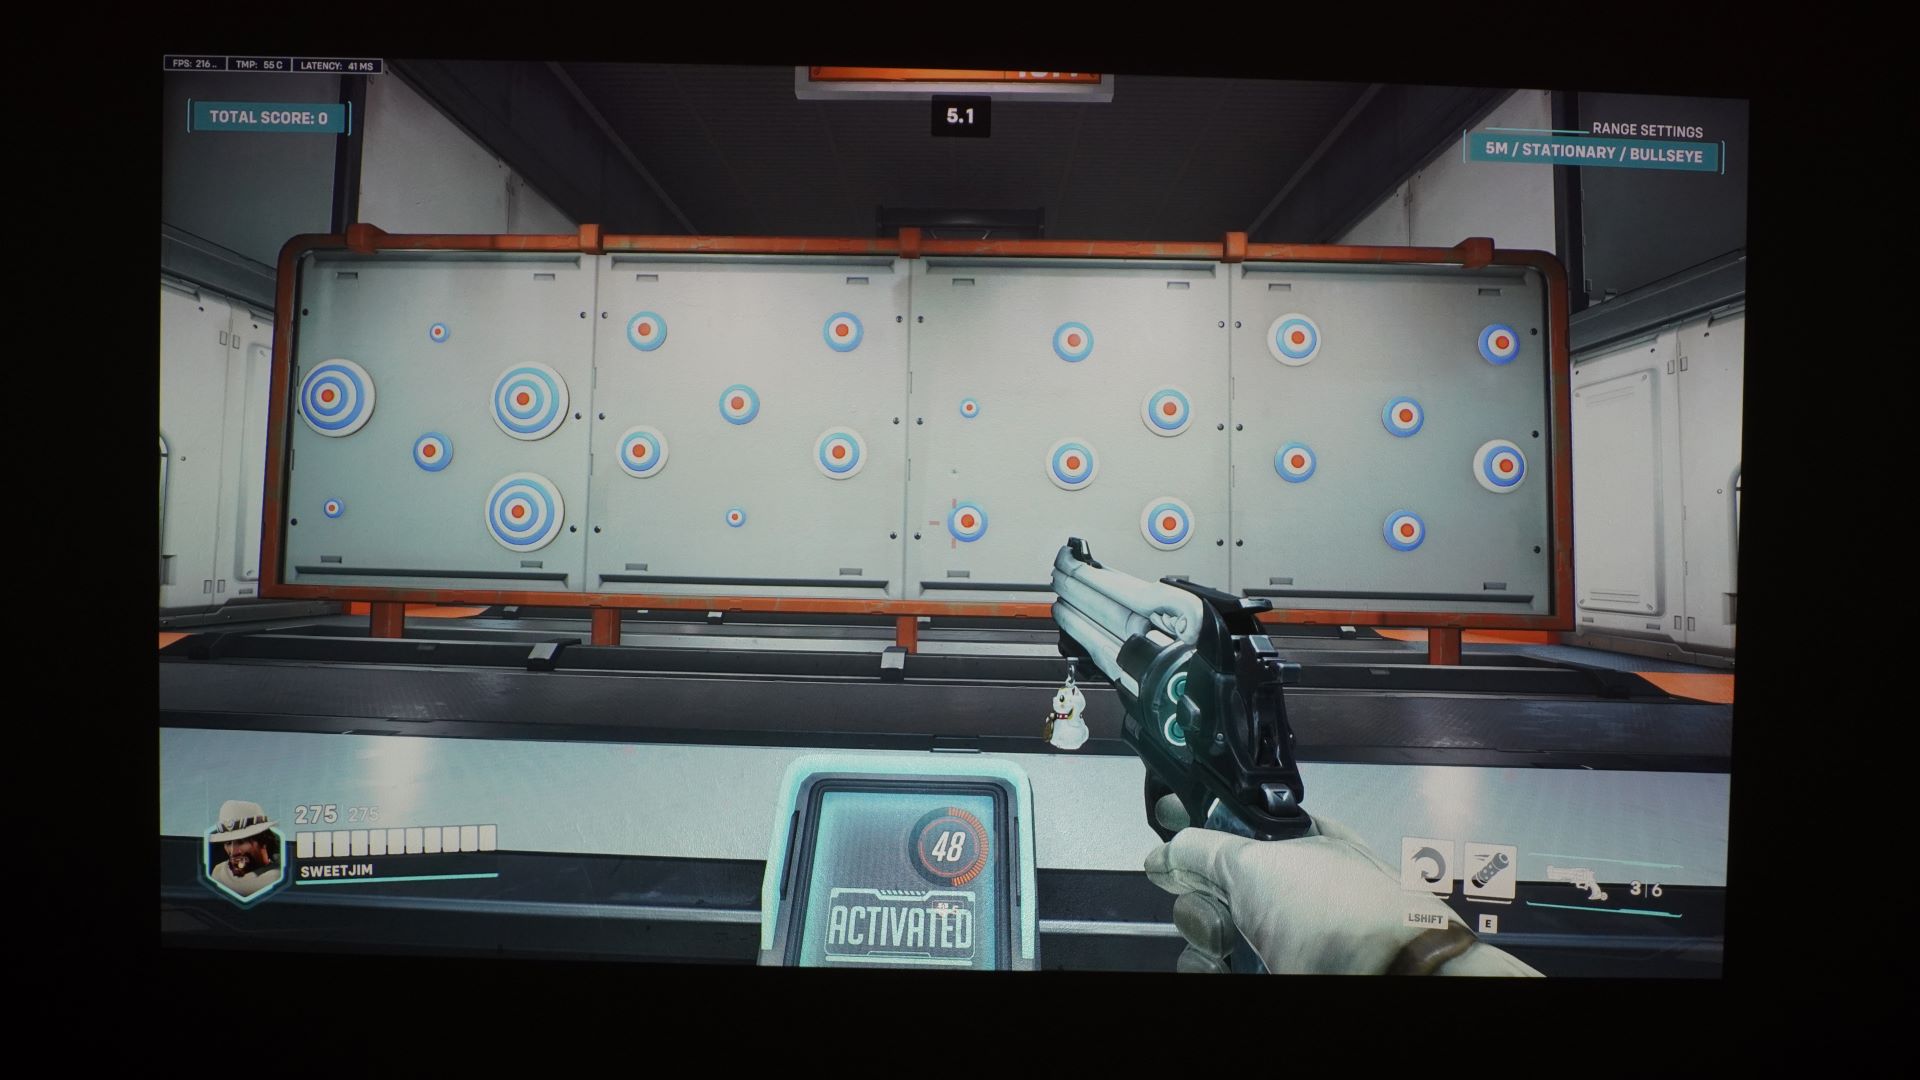 BenQ X3100i showing first person shooter game onscreen